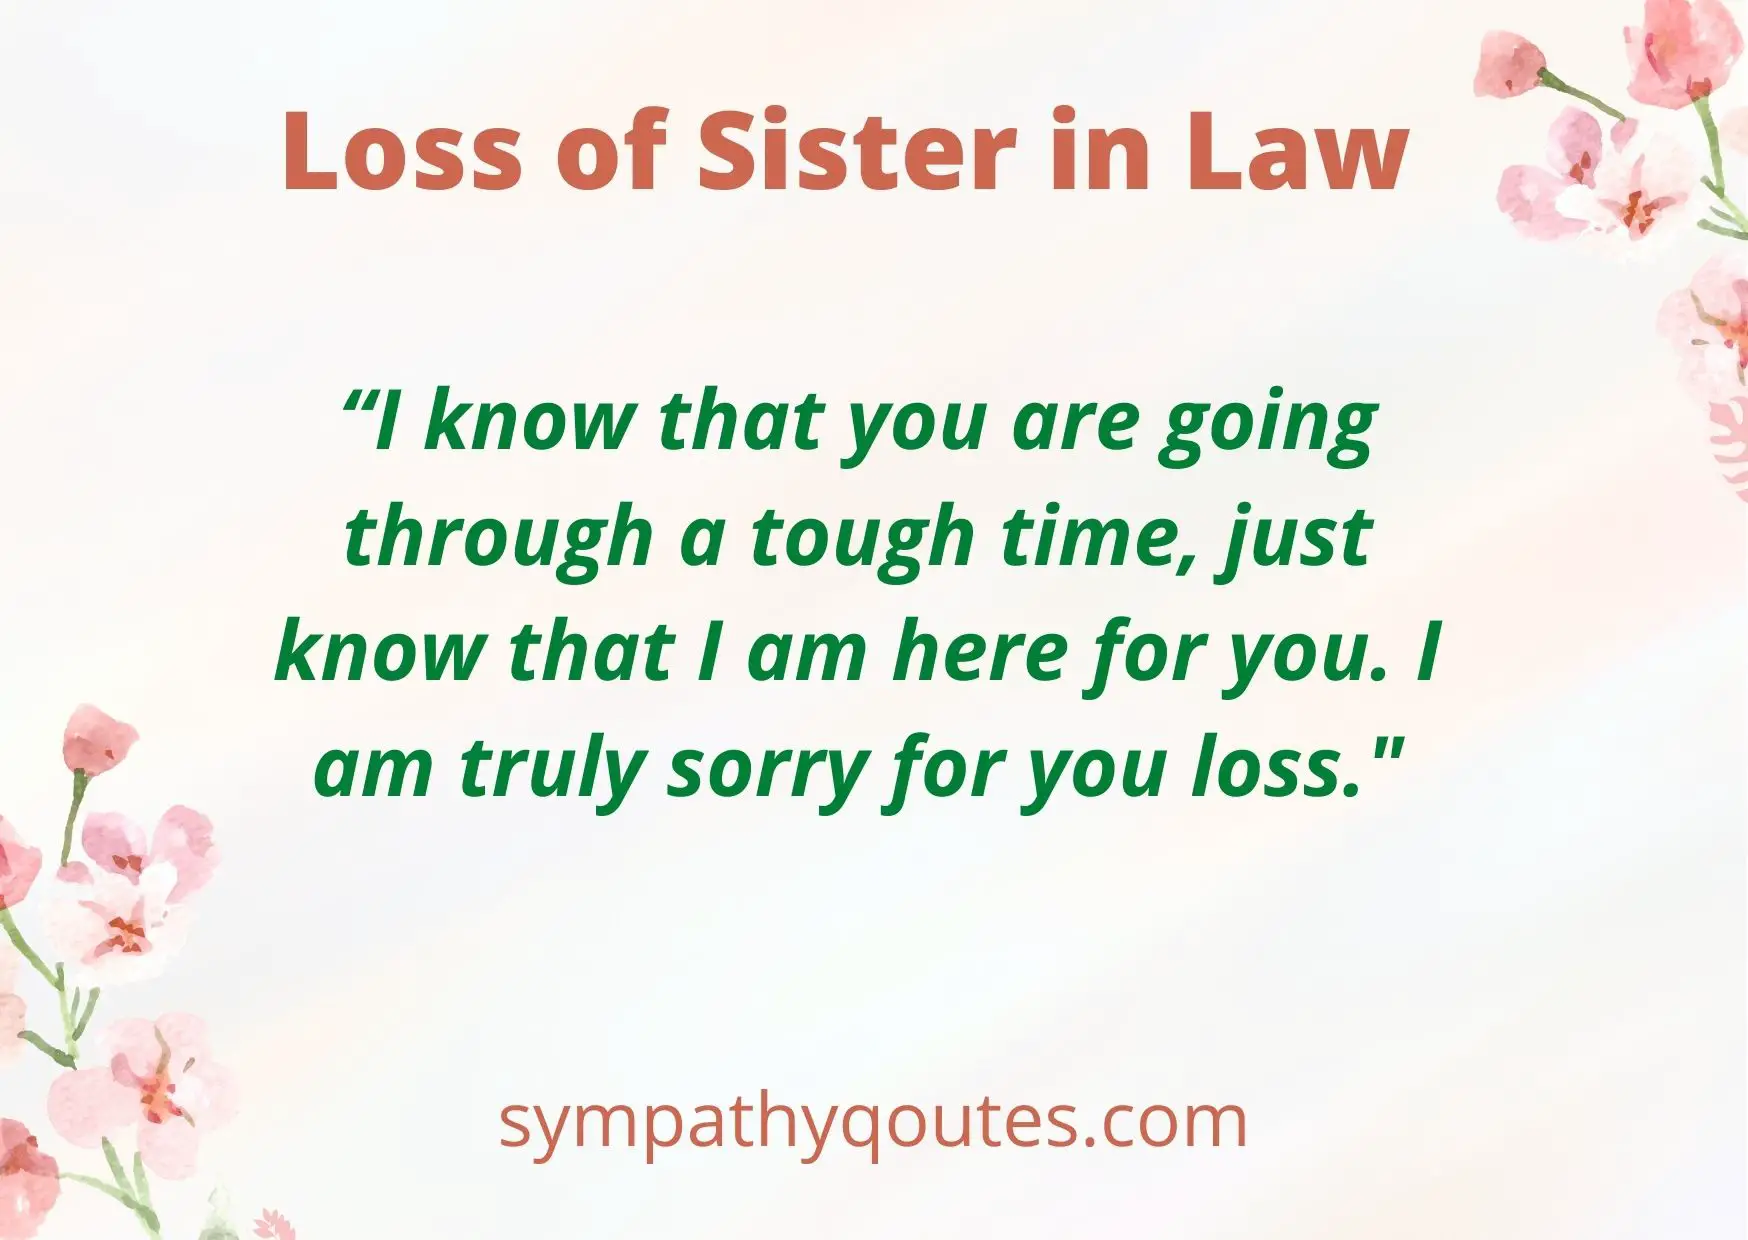 Sympathy Messages for Loss of Sister in Law